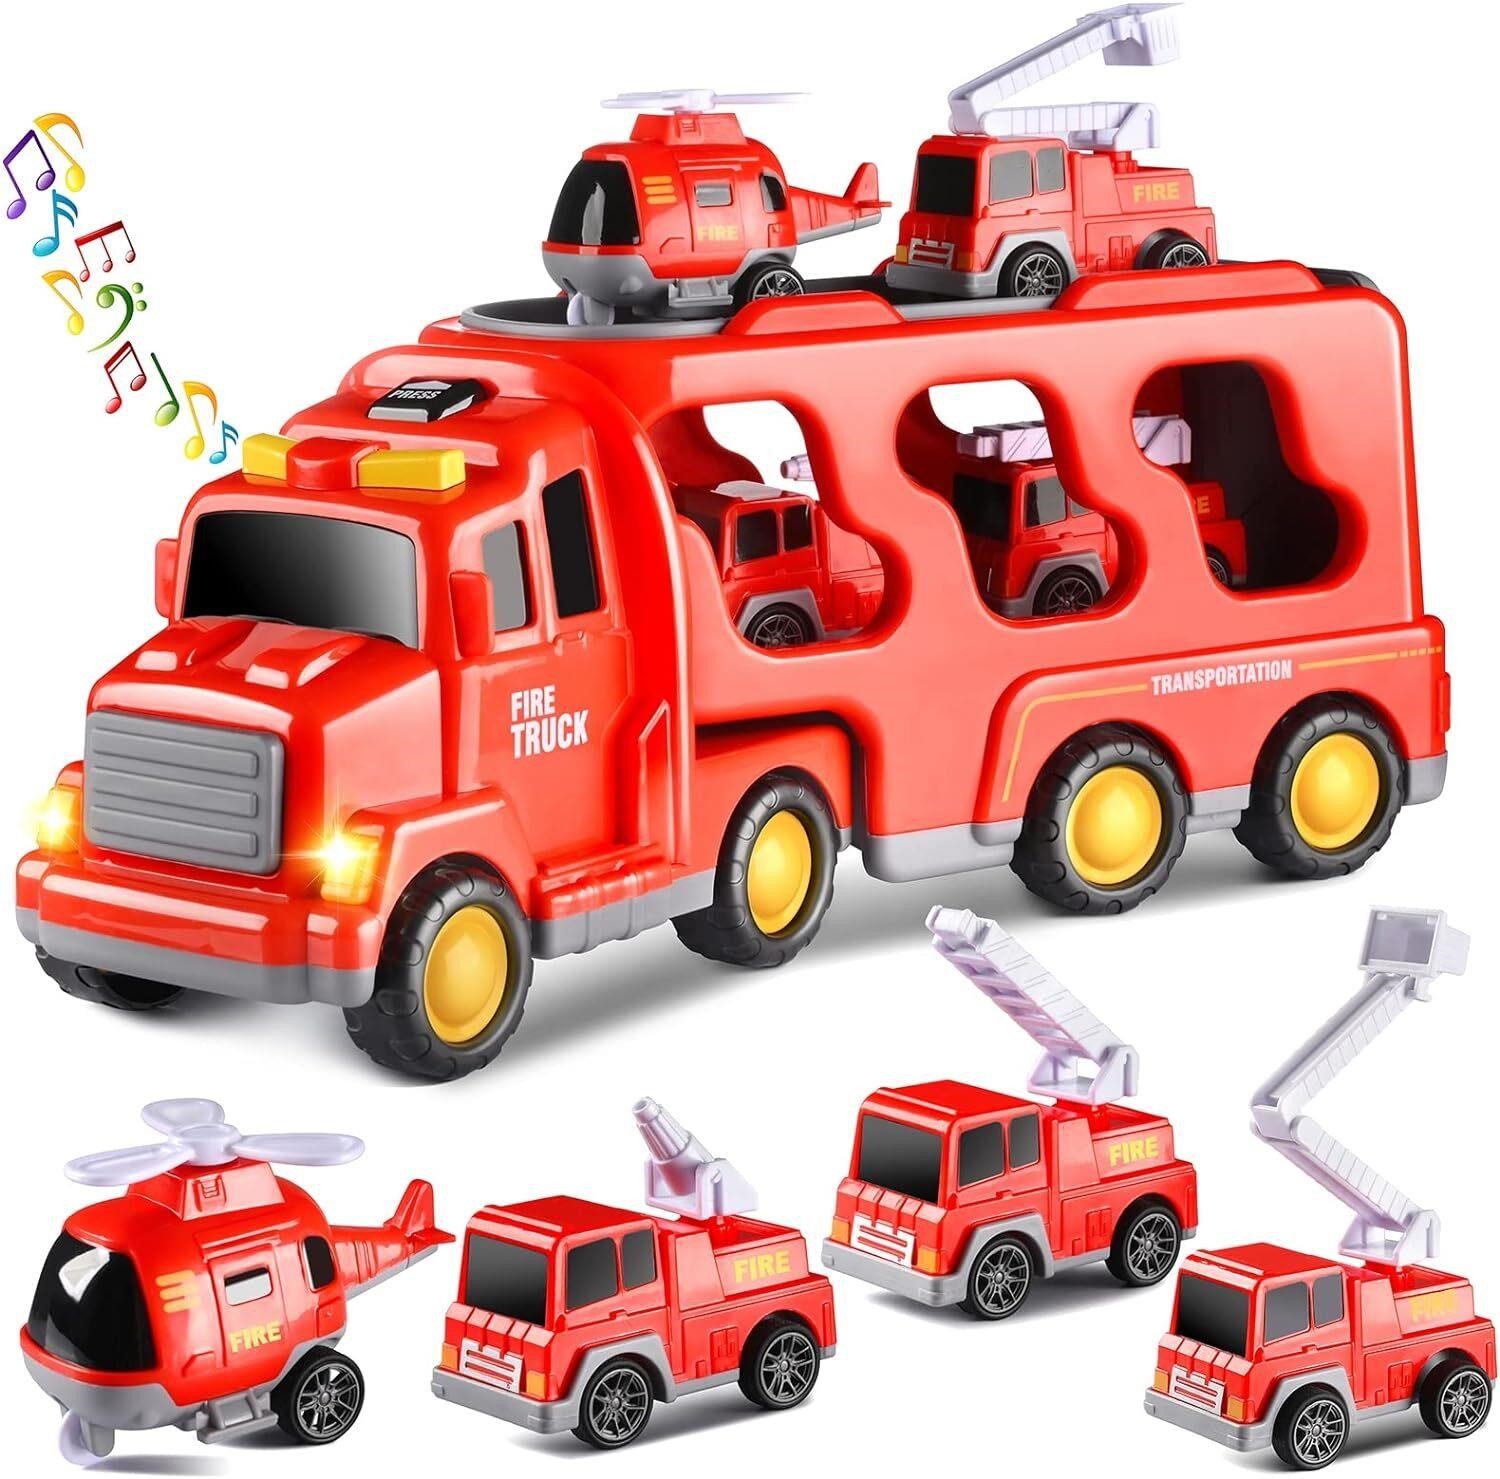 Fire Truck Toy  Friction Power 5 in 1 Vehicle